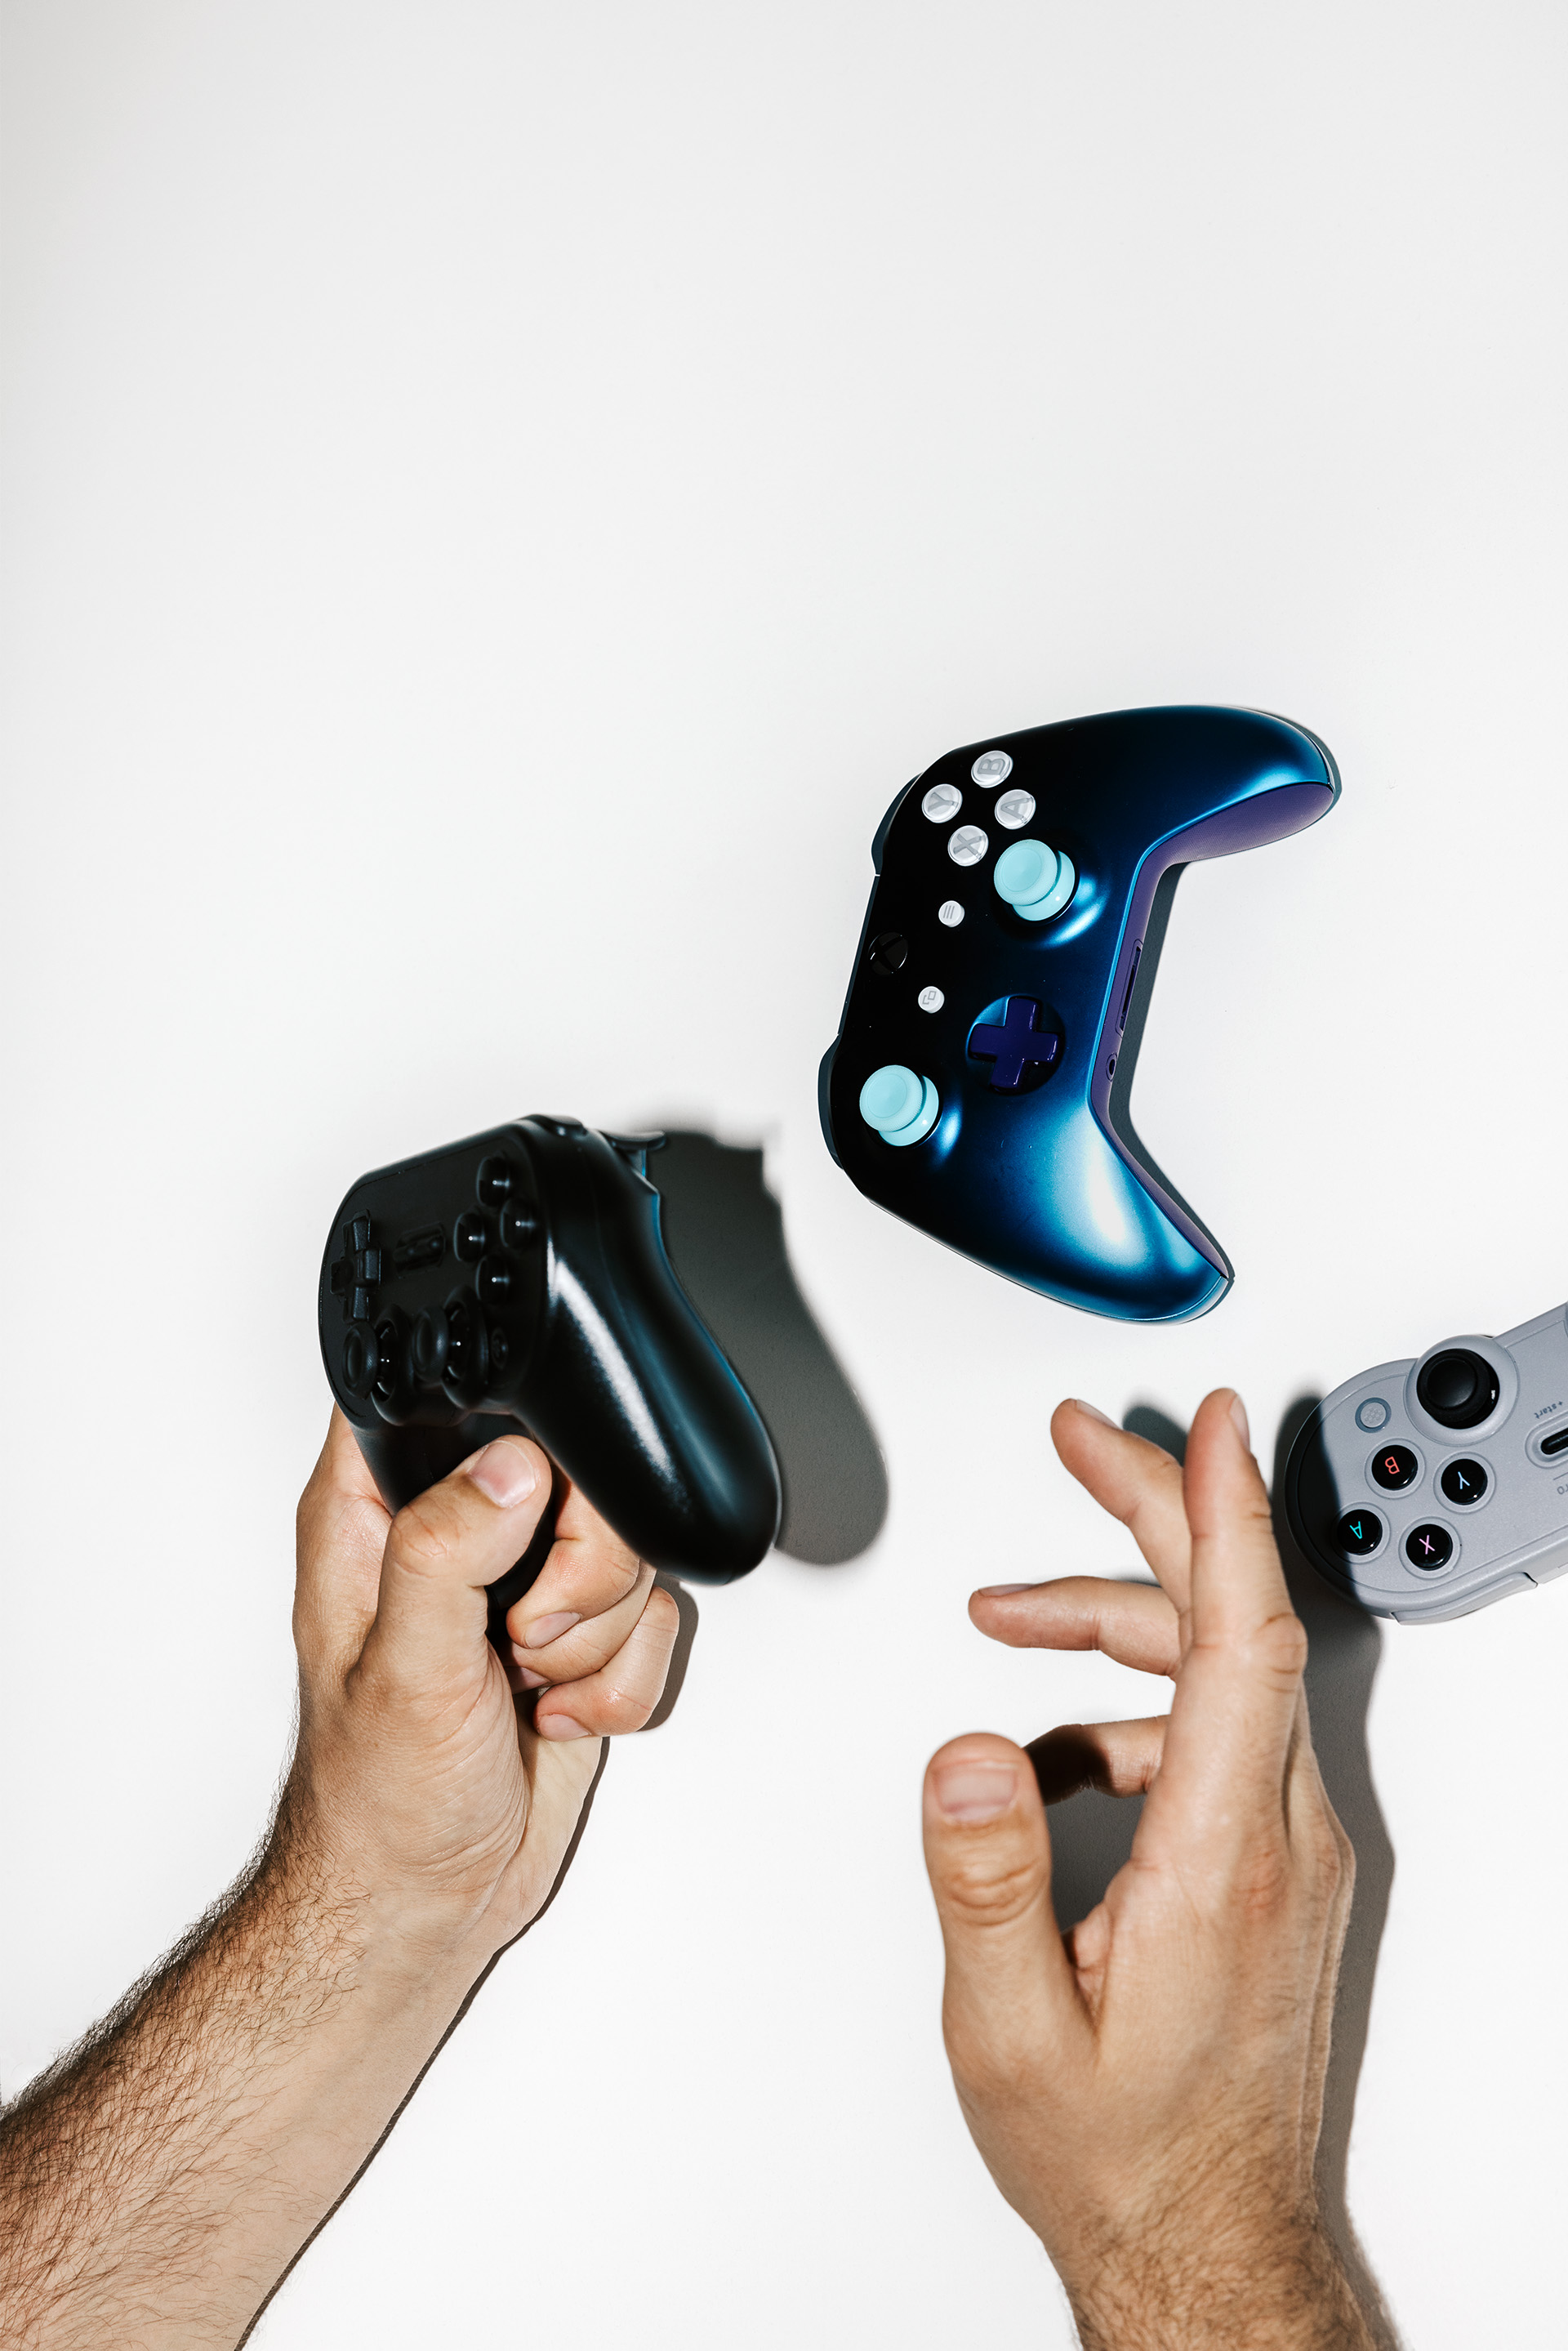 A hand and several controllers can be seen.